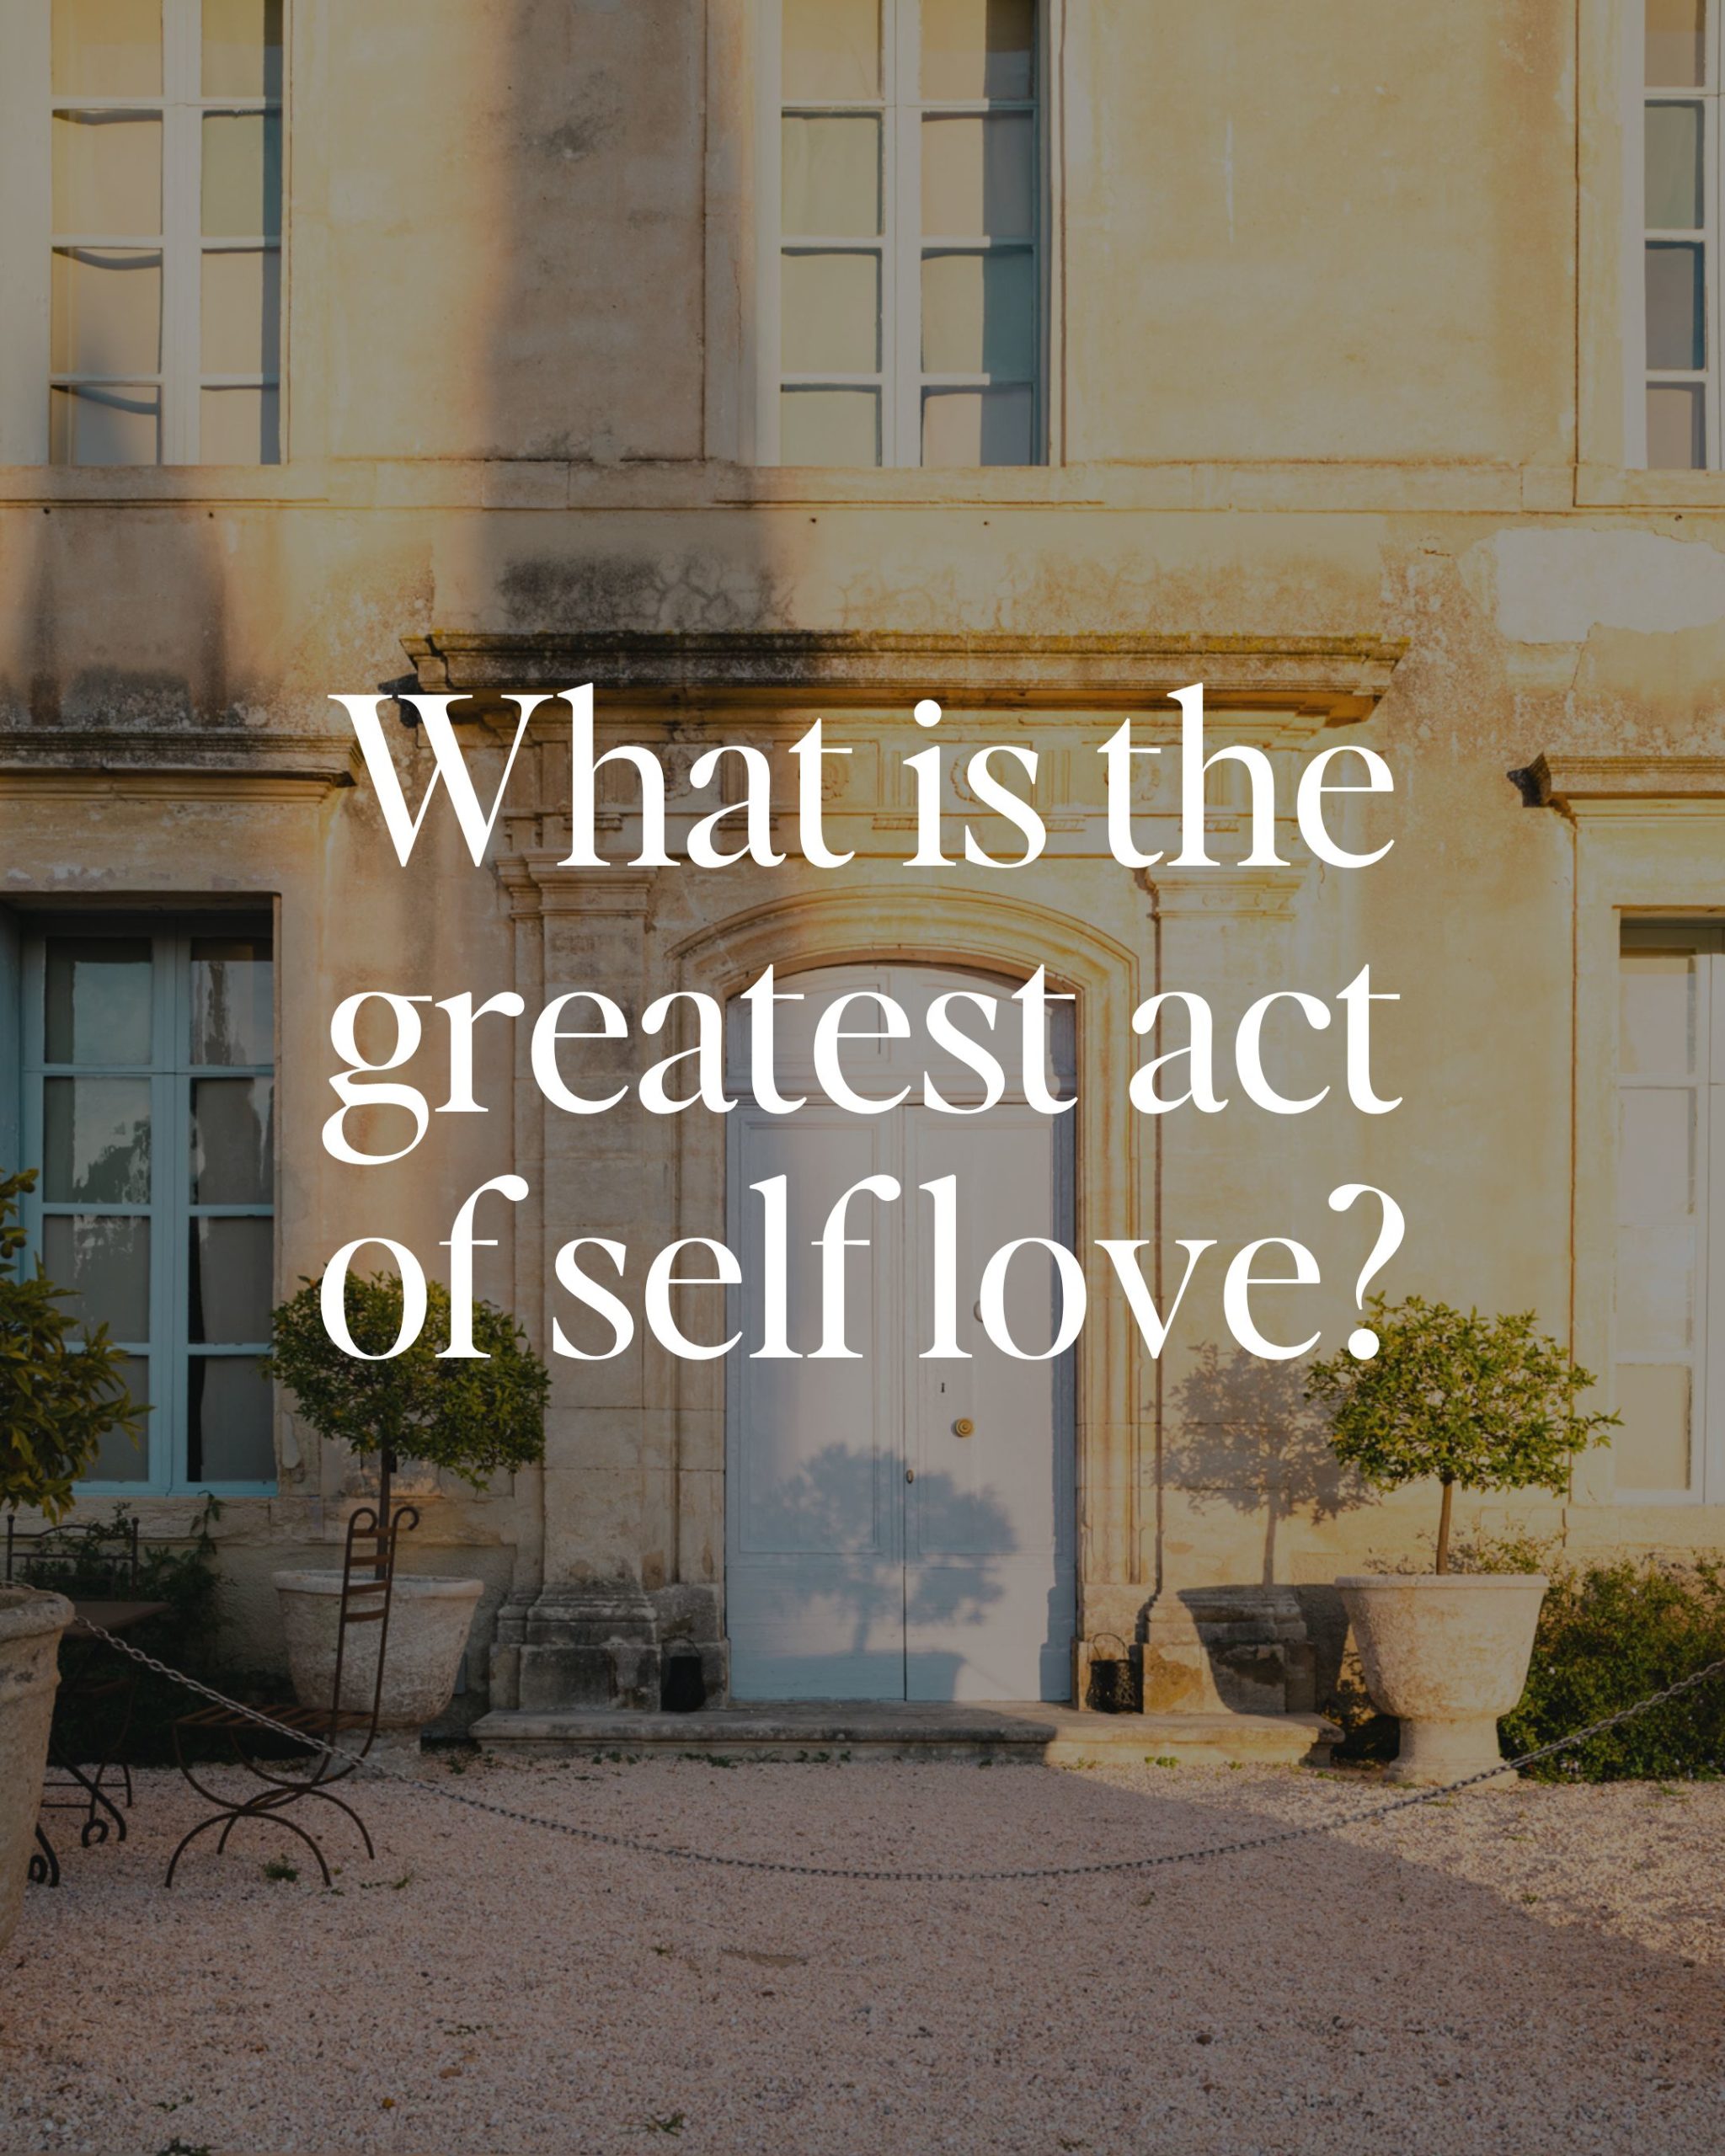 what is the greatest act of self love?